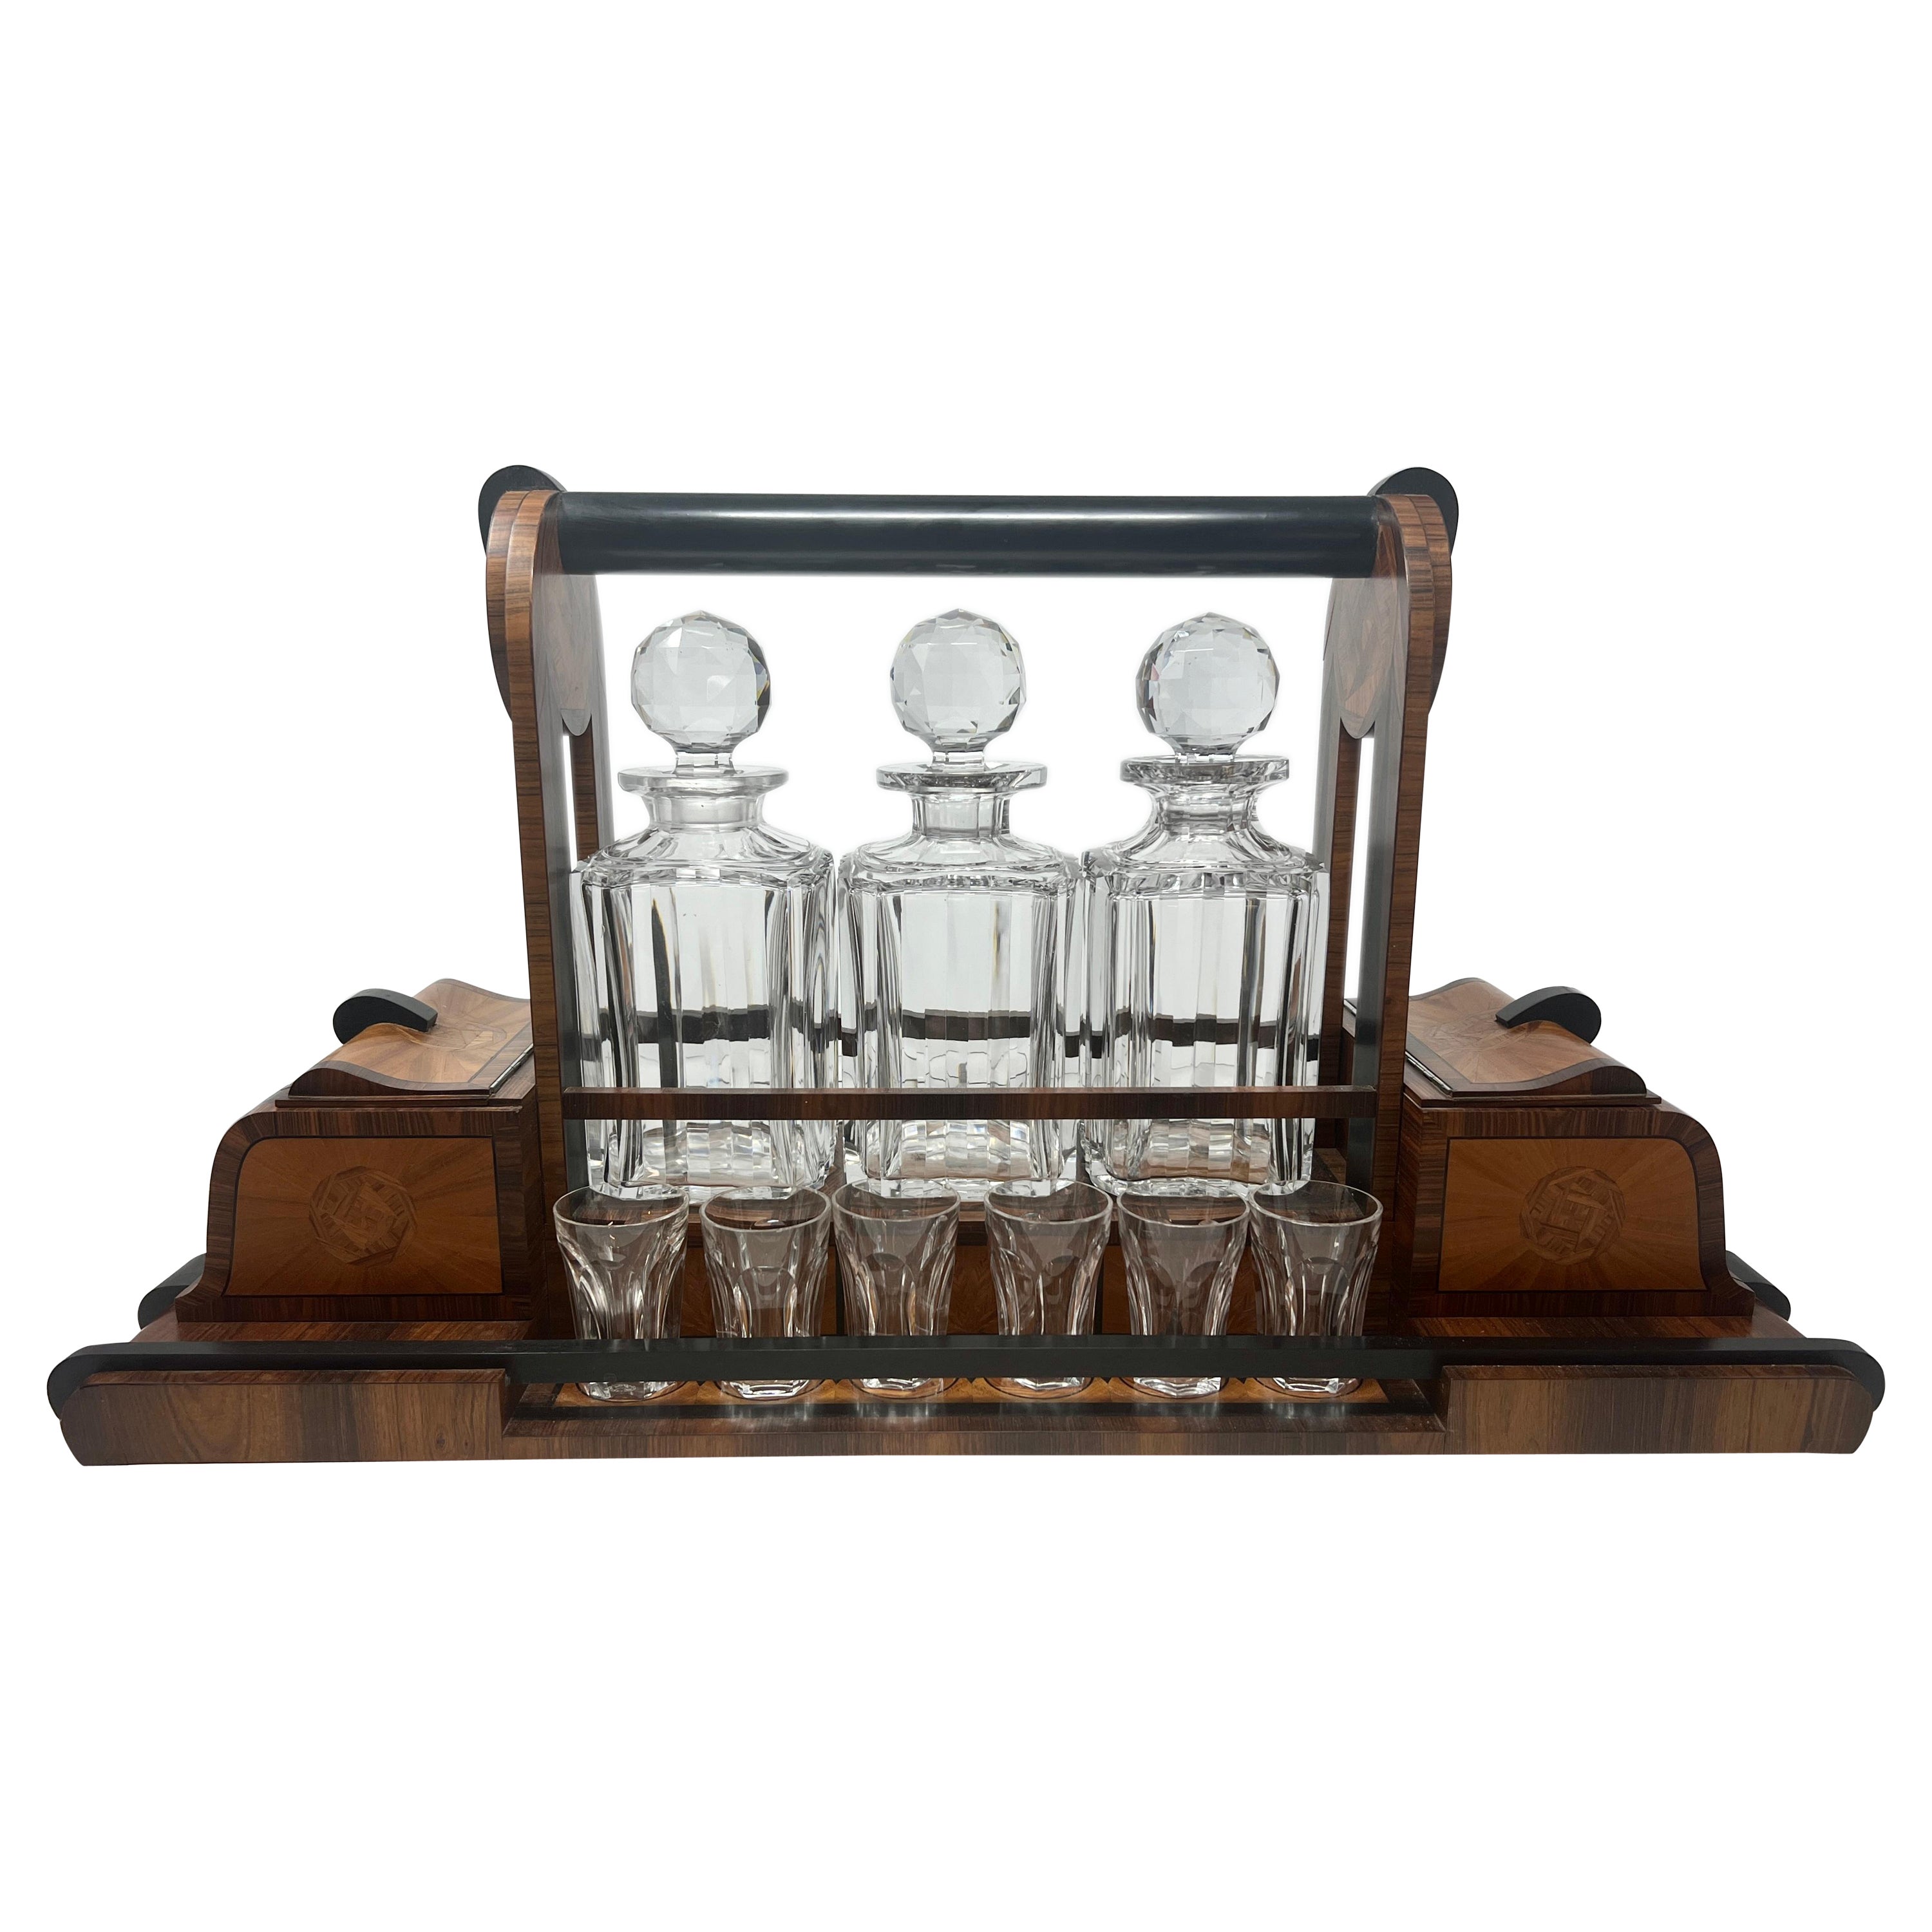 Antique English Rosewood & Crystal 3 Bottle Tantalus with Glasses, Circa 1910's For Sale